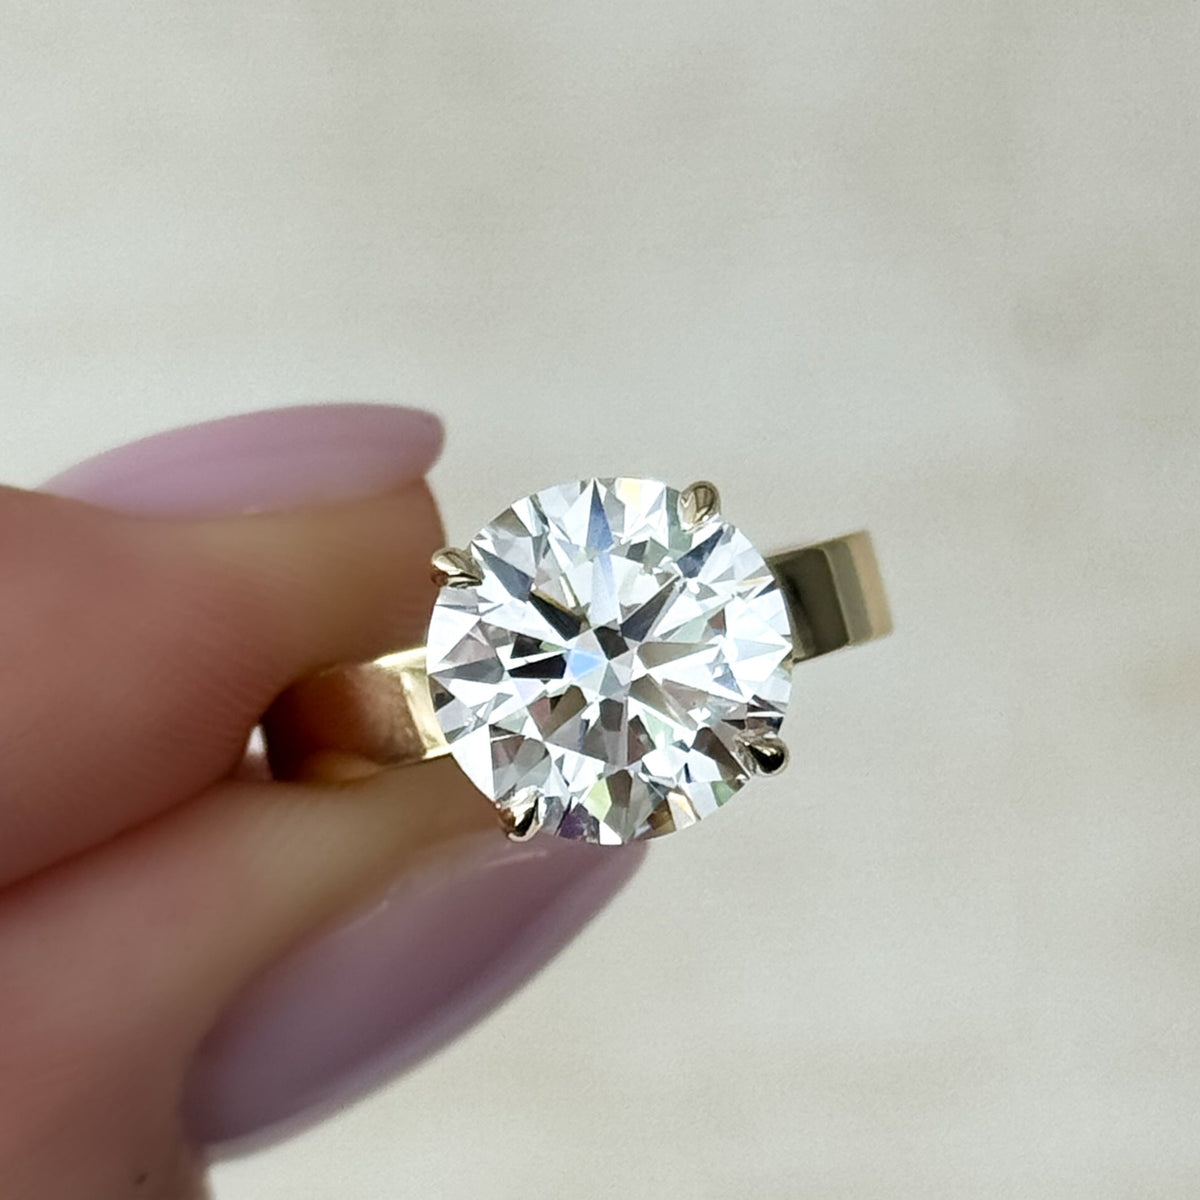 Finest Solitaire Engagement Ring With Round Brilliant Cut Diamond